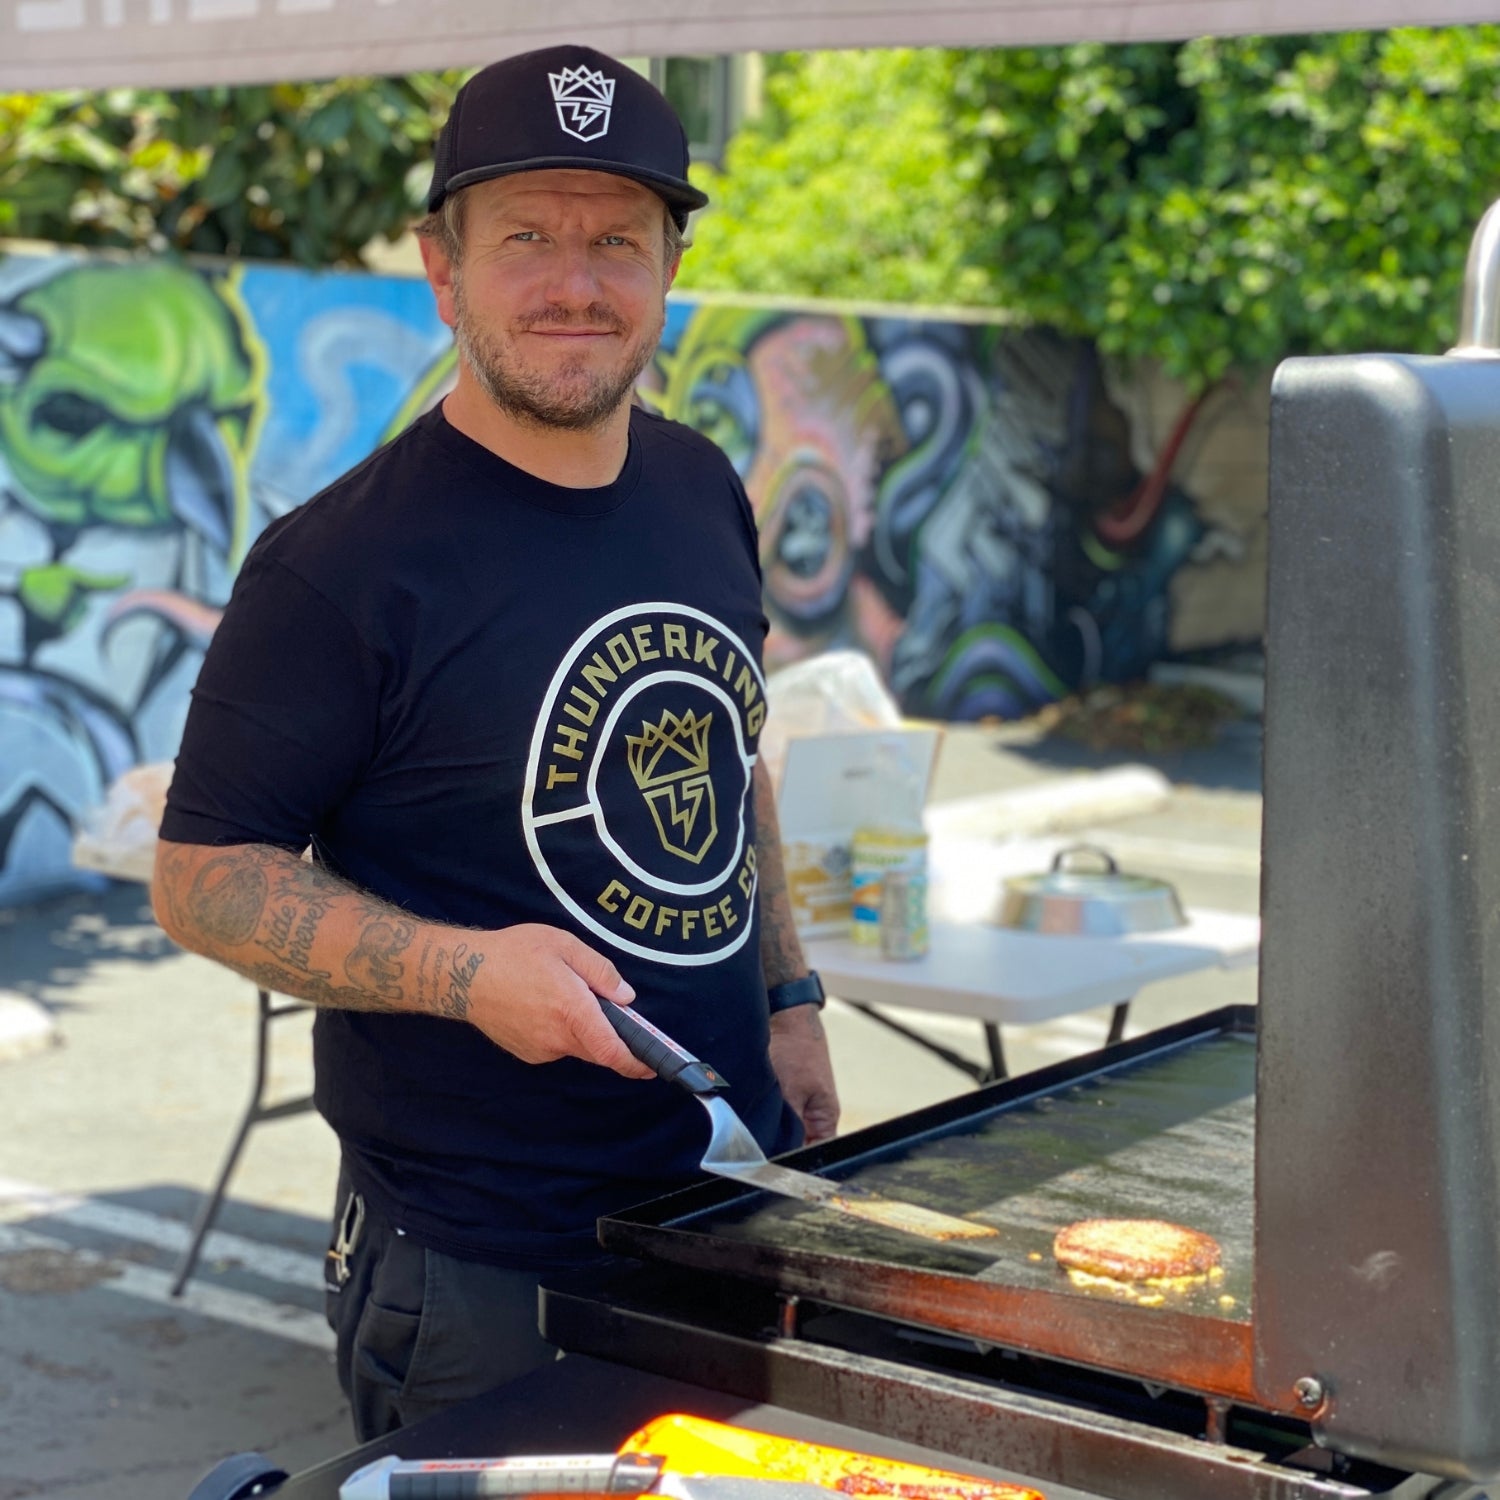 Orquest aedelweiss Hockey Clothing Company announces their Free Burger Friday kick offs on June 2nd in Sydney, California. Text your buds and start planning some trips down to VG HQ! In the meantime, take a look at these snapshots from previous FBFs. 